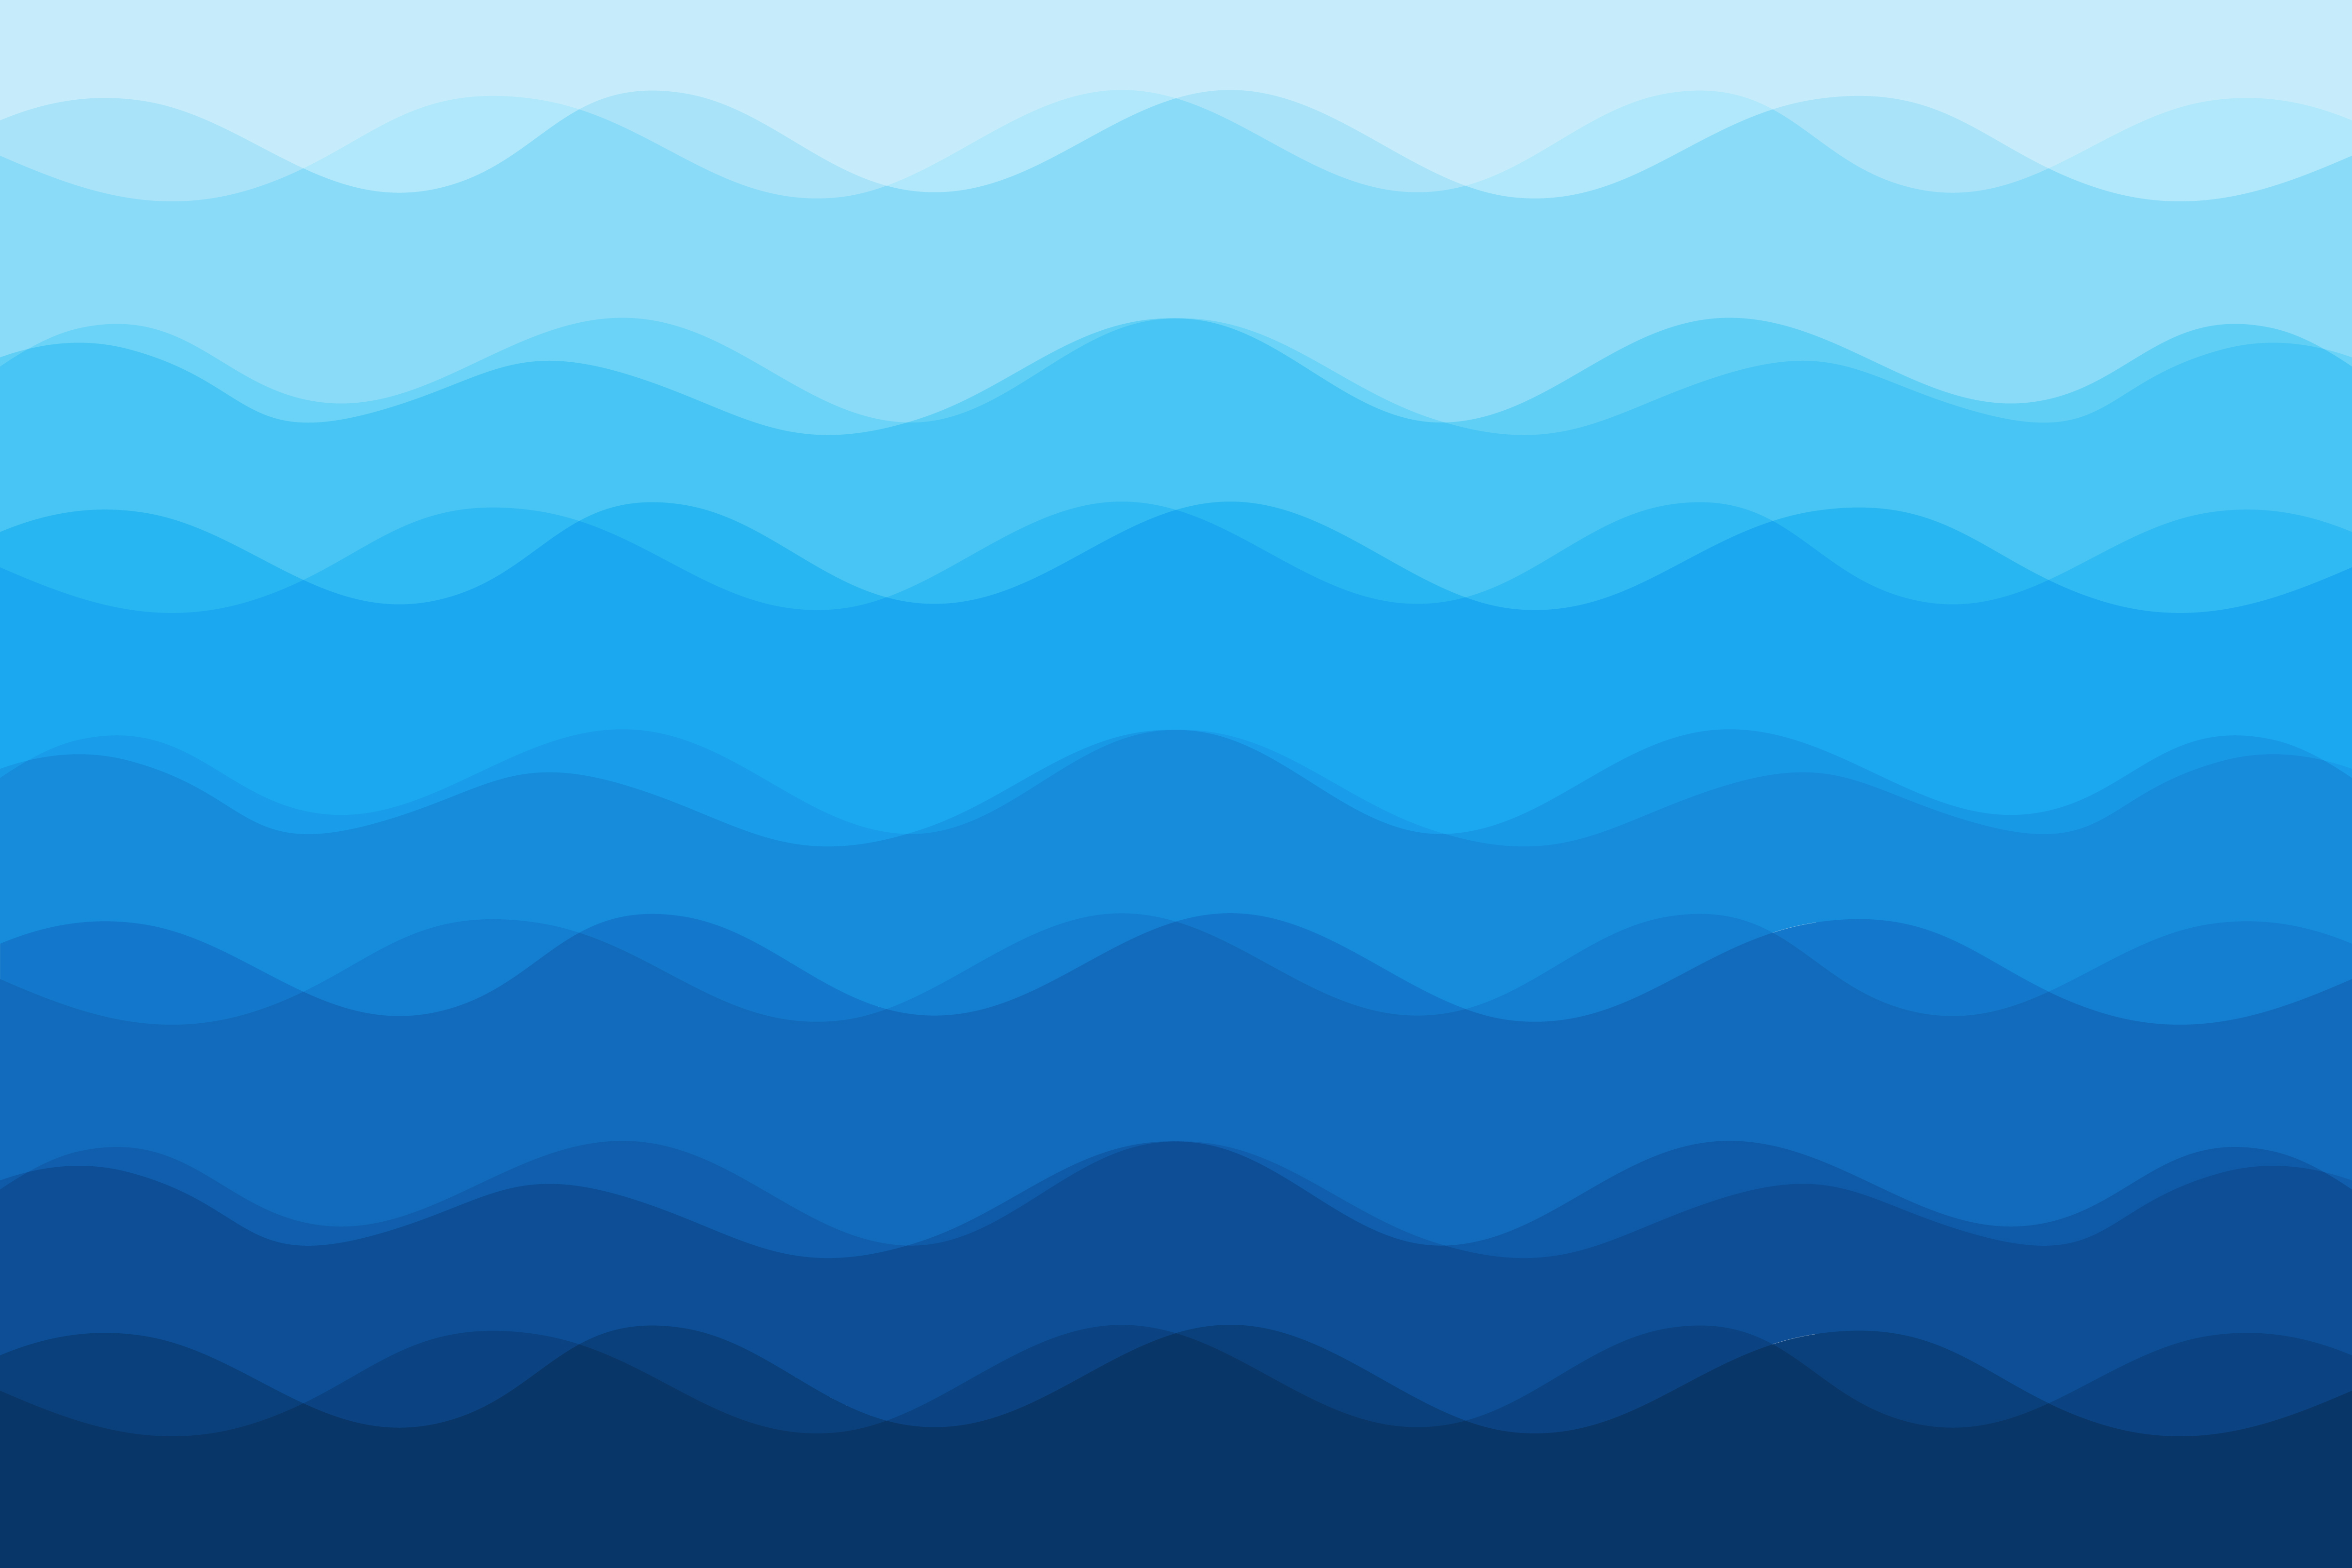 Abstract blue waves background for design 626047   Download Free